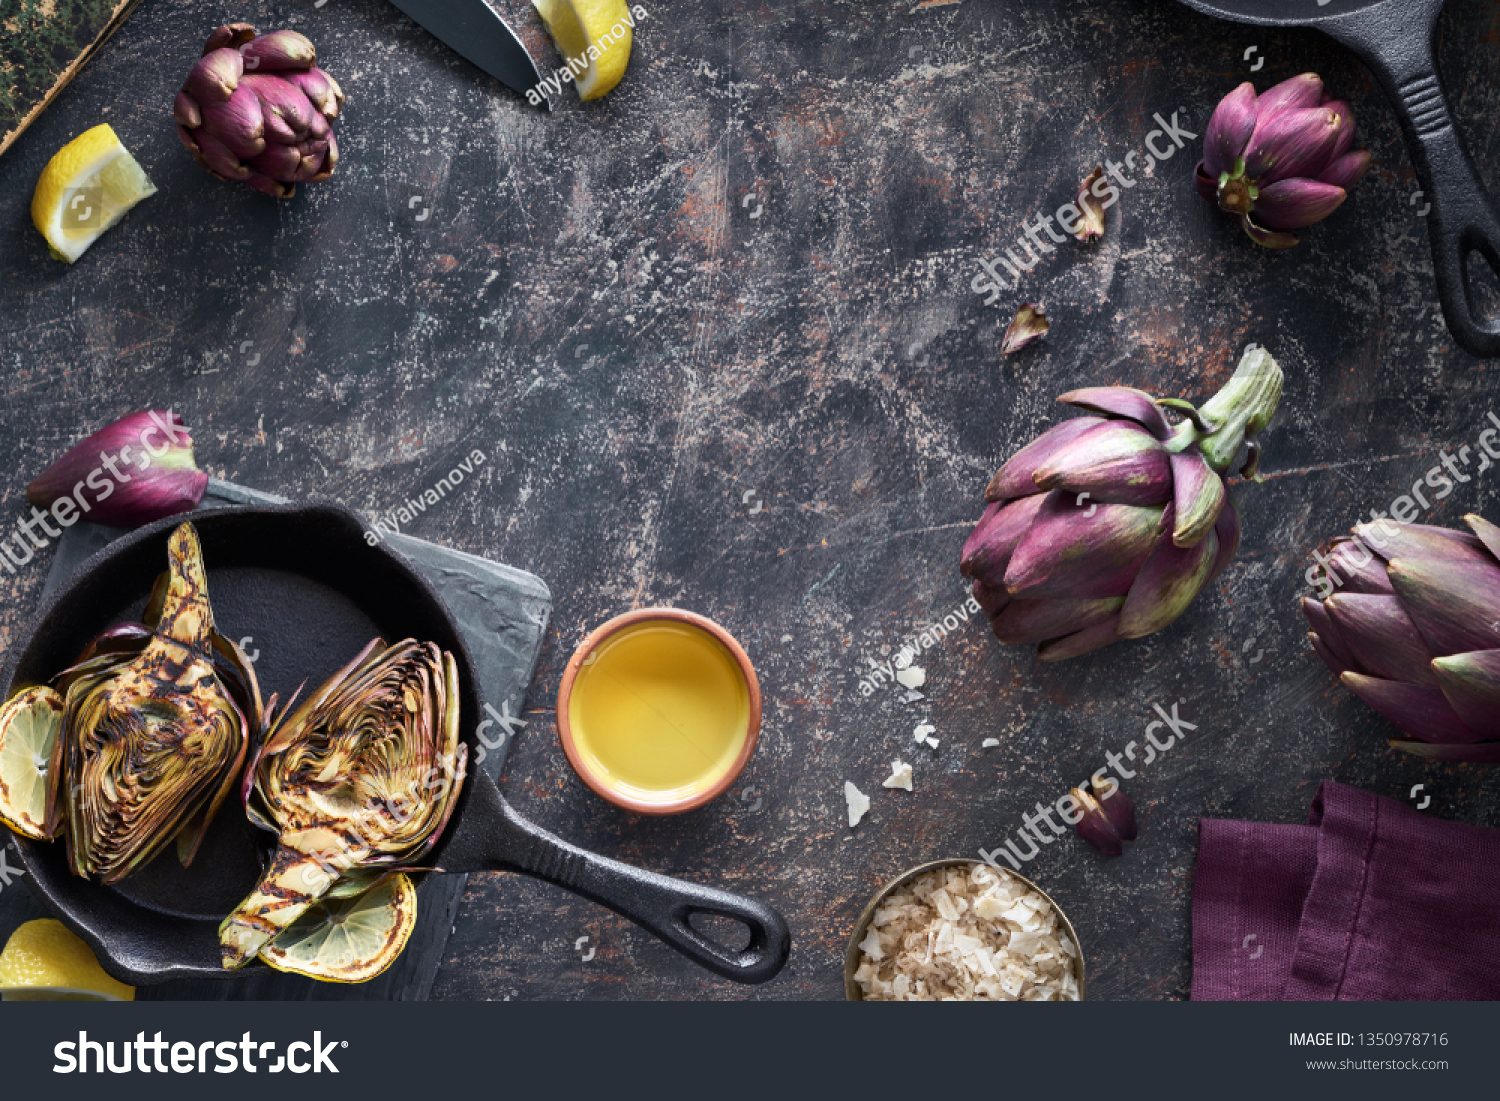 Flat lay with fresh and grilled red artishokes, whole and halved, on dark textured background with copy-space #1350978716